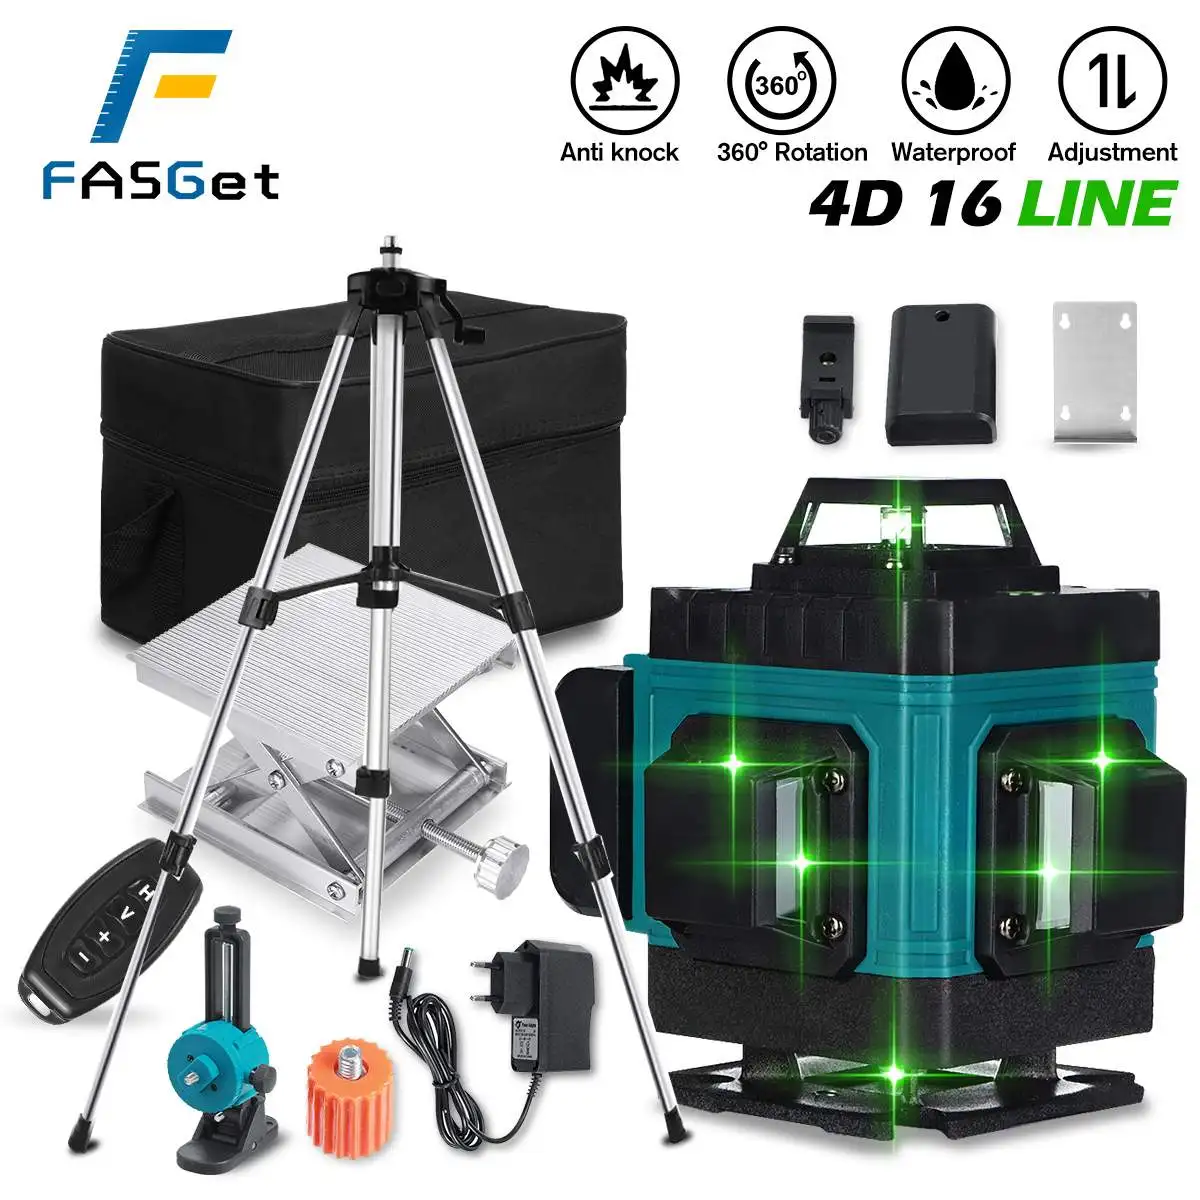 FASGet 16 Lines 4D Laser Level Vertical Horizontal Cross Line Self-leveling Laser Level 360° with Extension Bar Tripod Stand